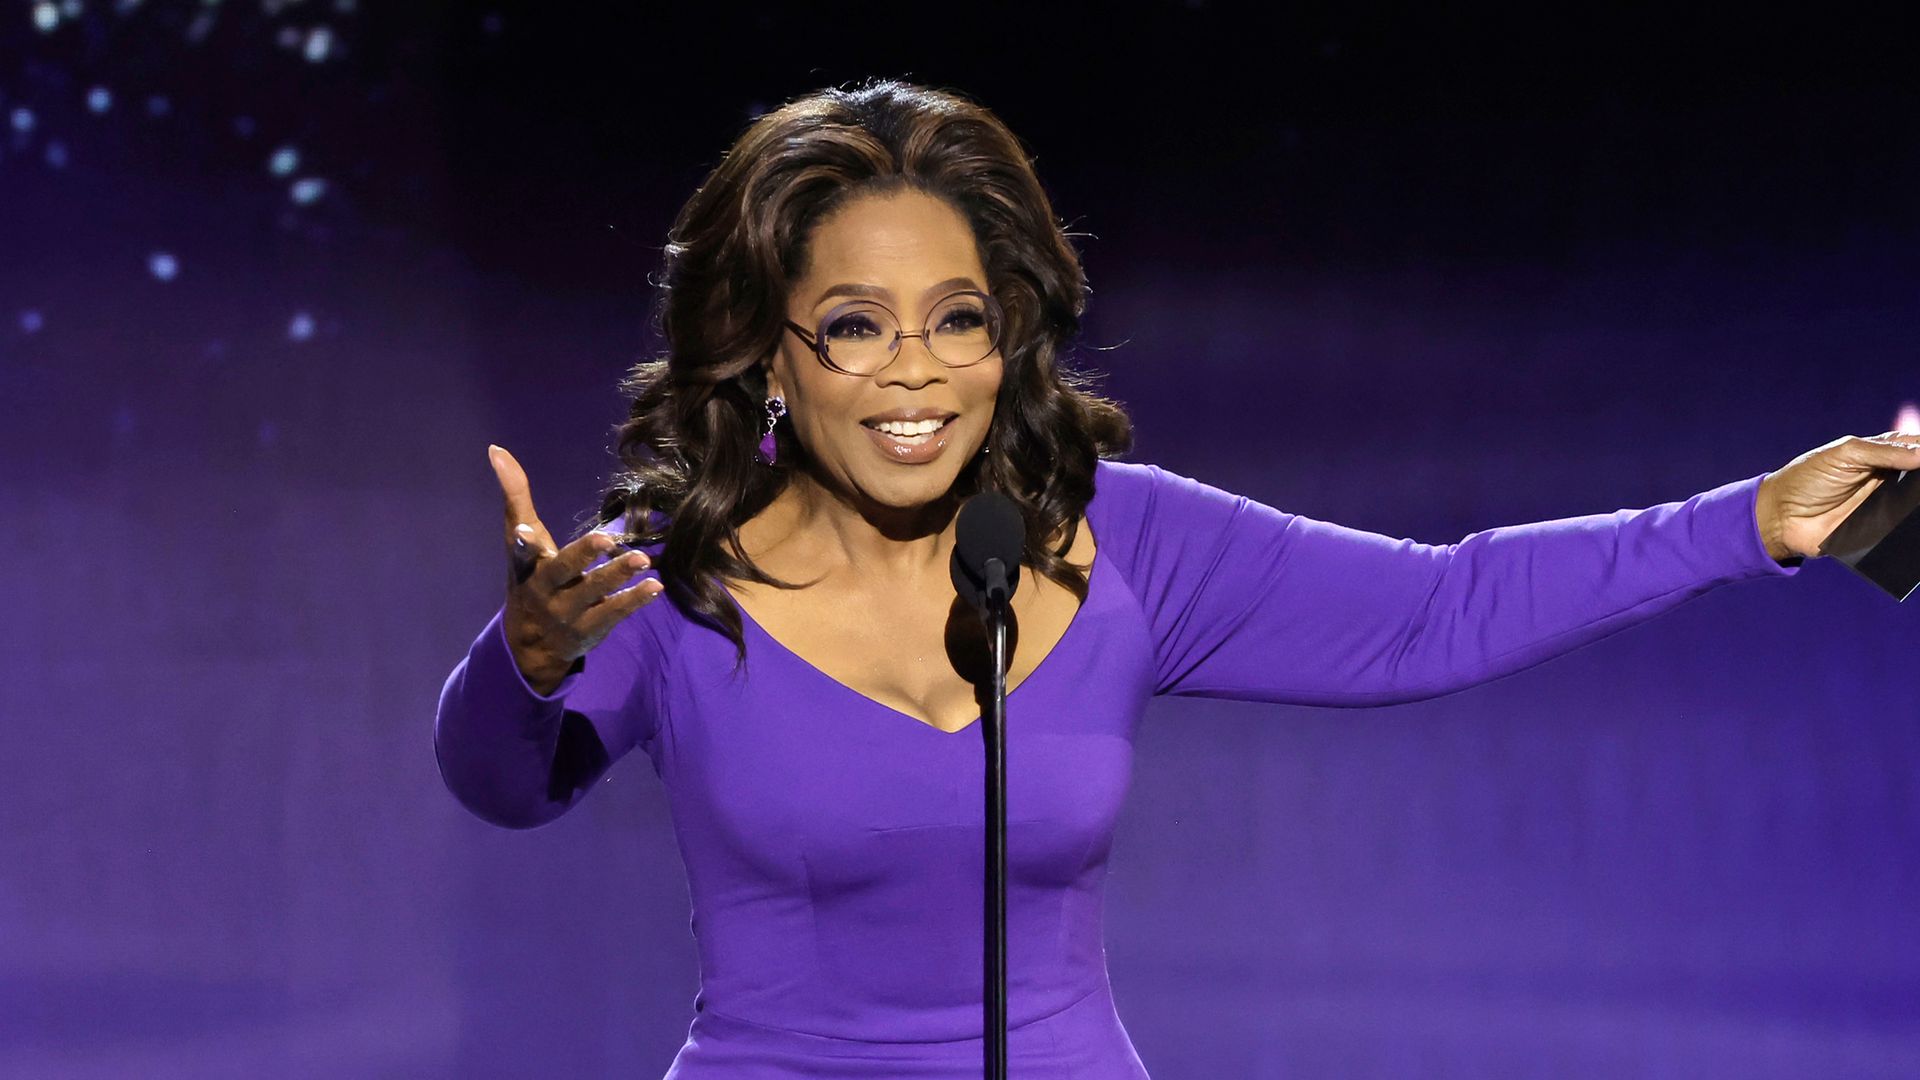 Oprah opens up about difficult moment on national TV when asked about her weight